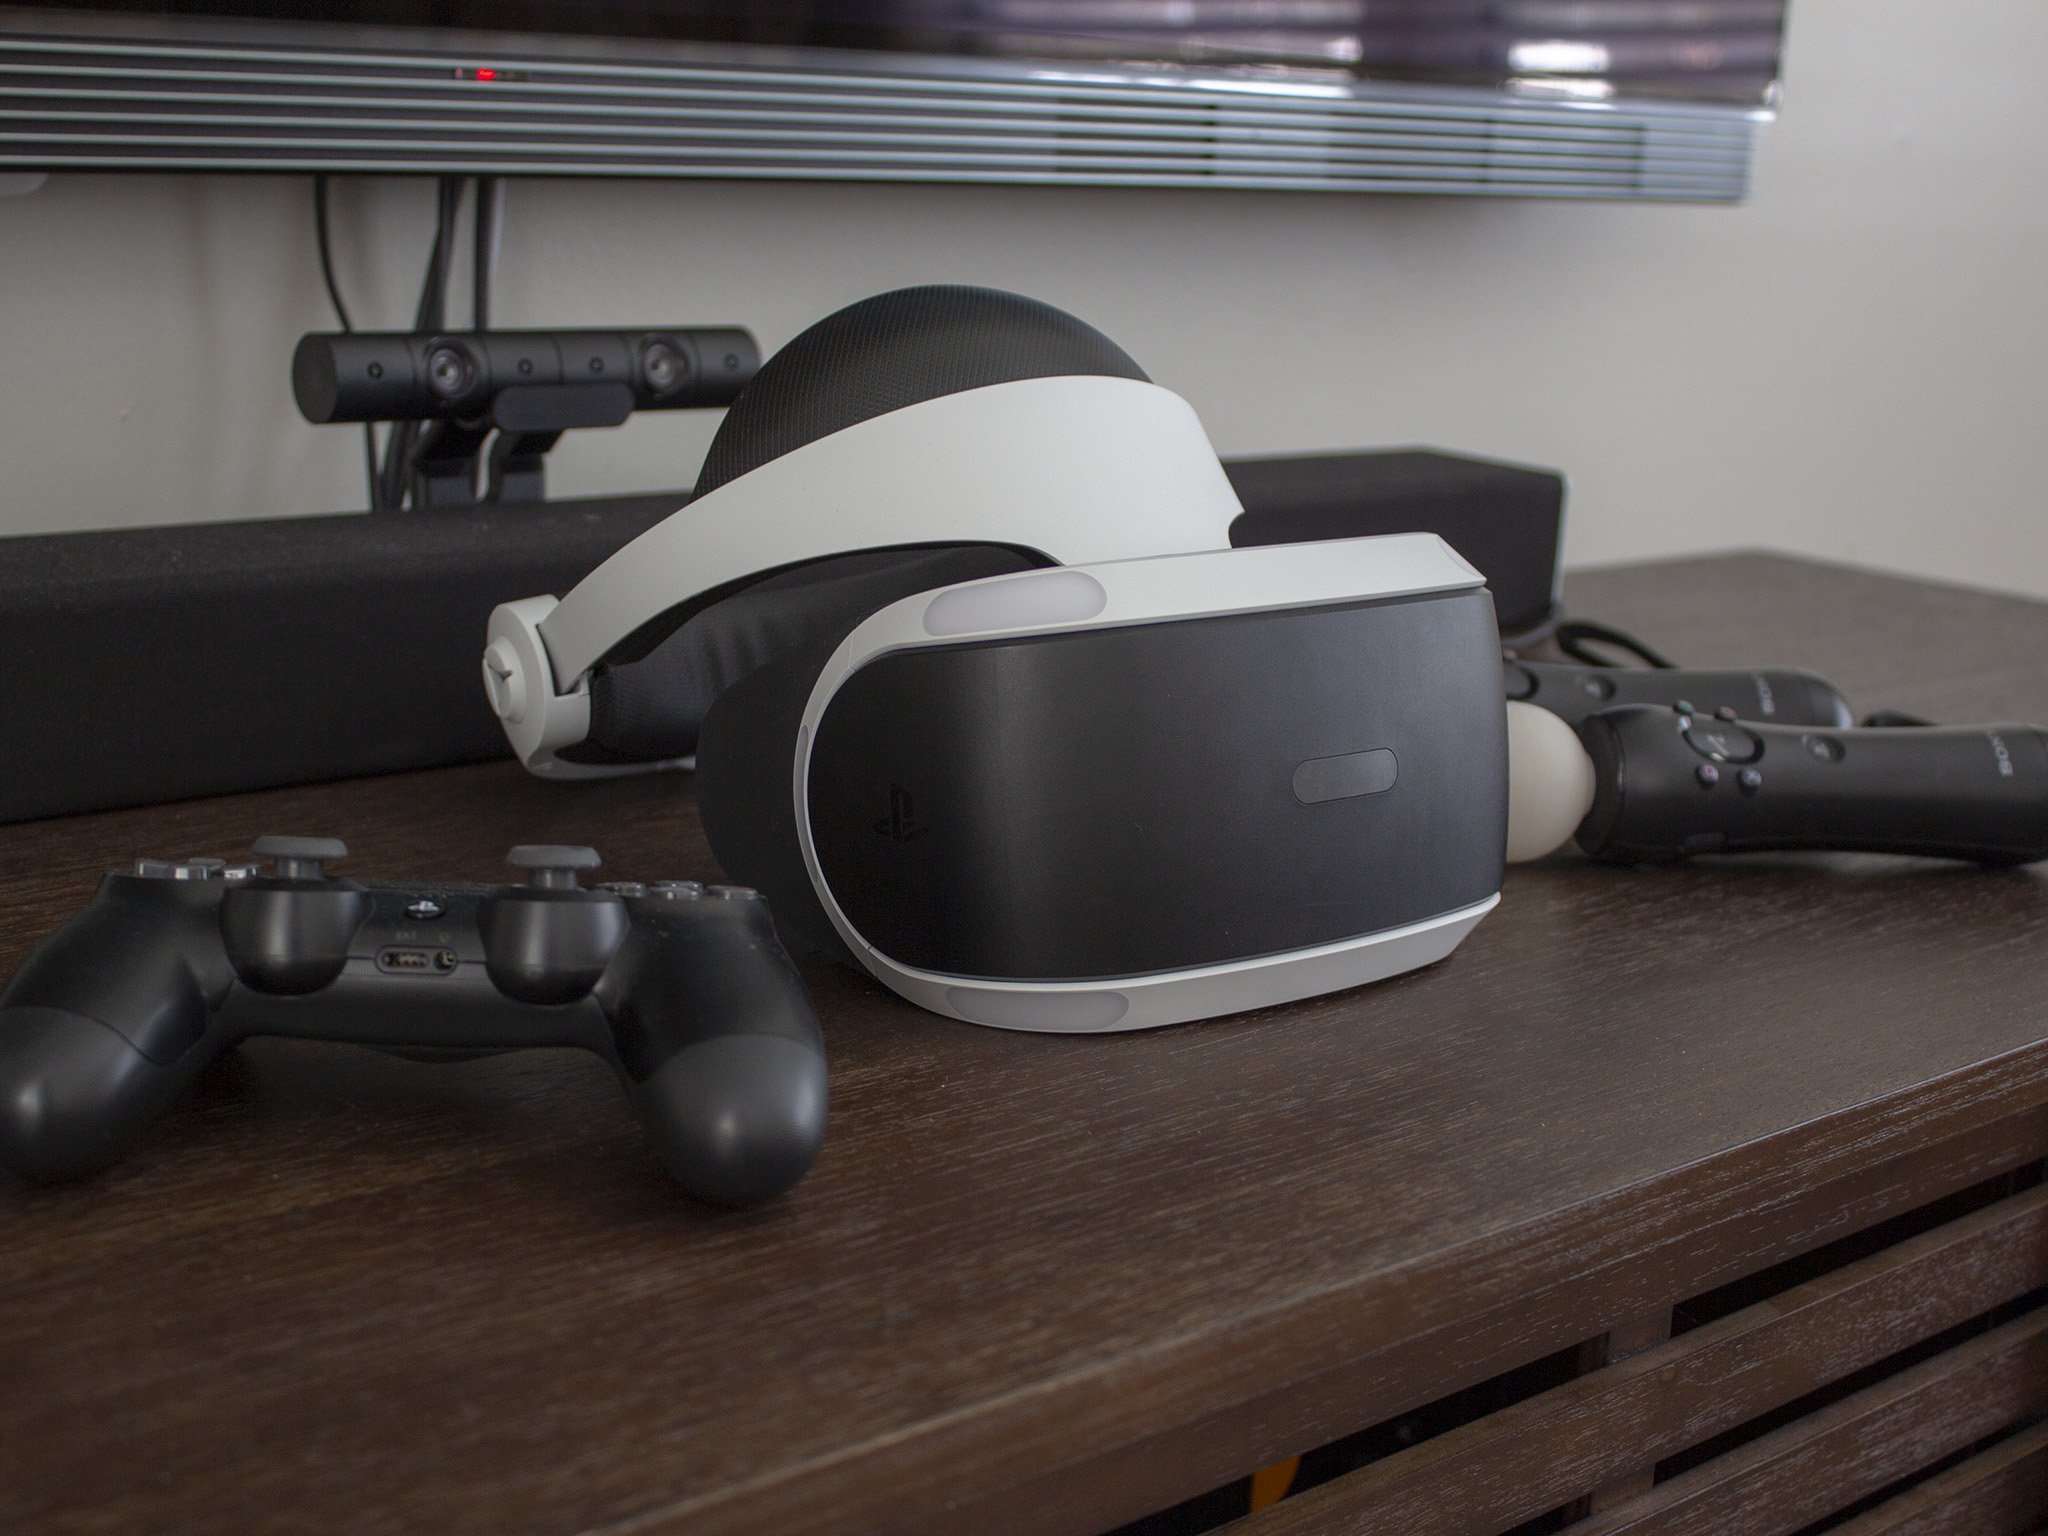 Every PlayStation VR Game with HOTAS Support in 2022